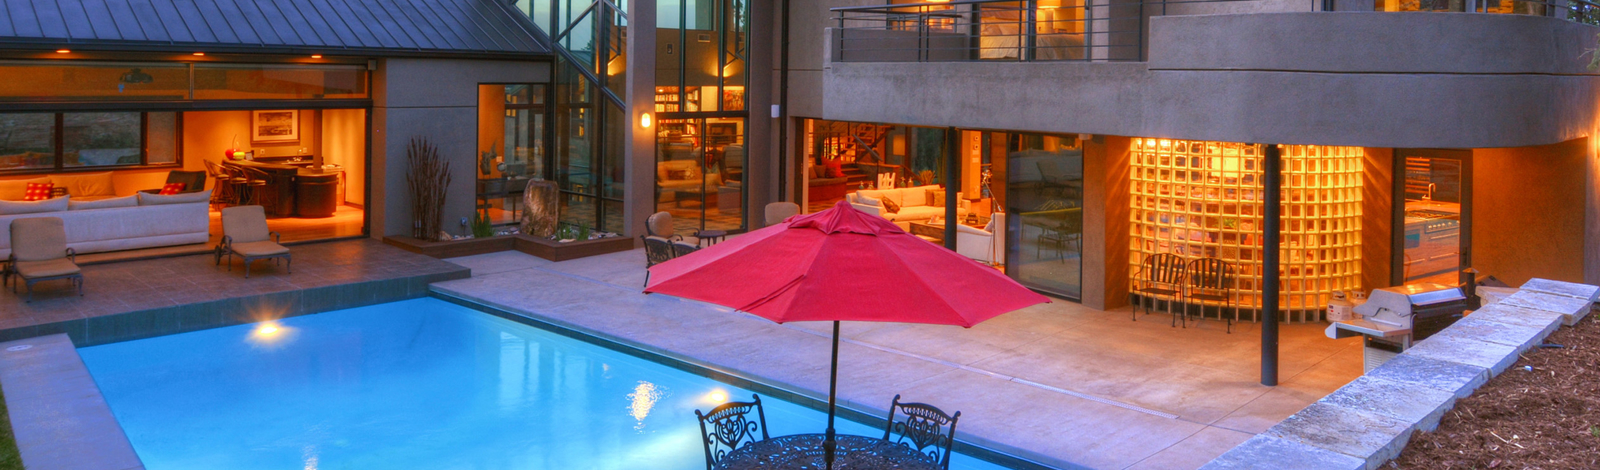 Outdoor living space of a luxury home in Colorado Springs. Blue pool, red patio umbrella, barbecue.